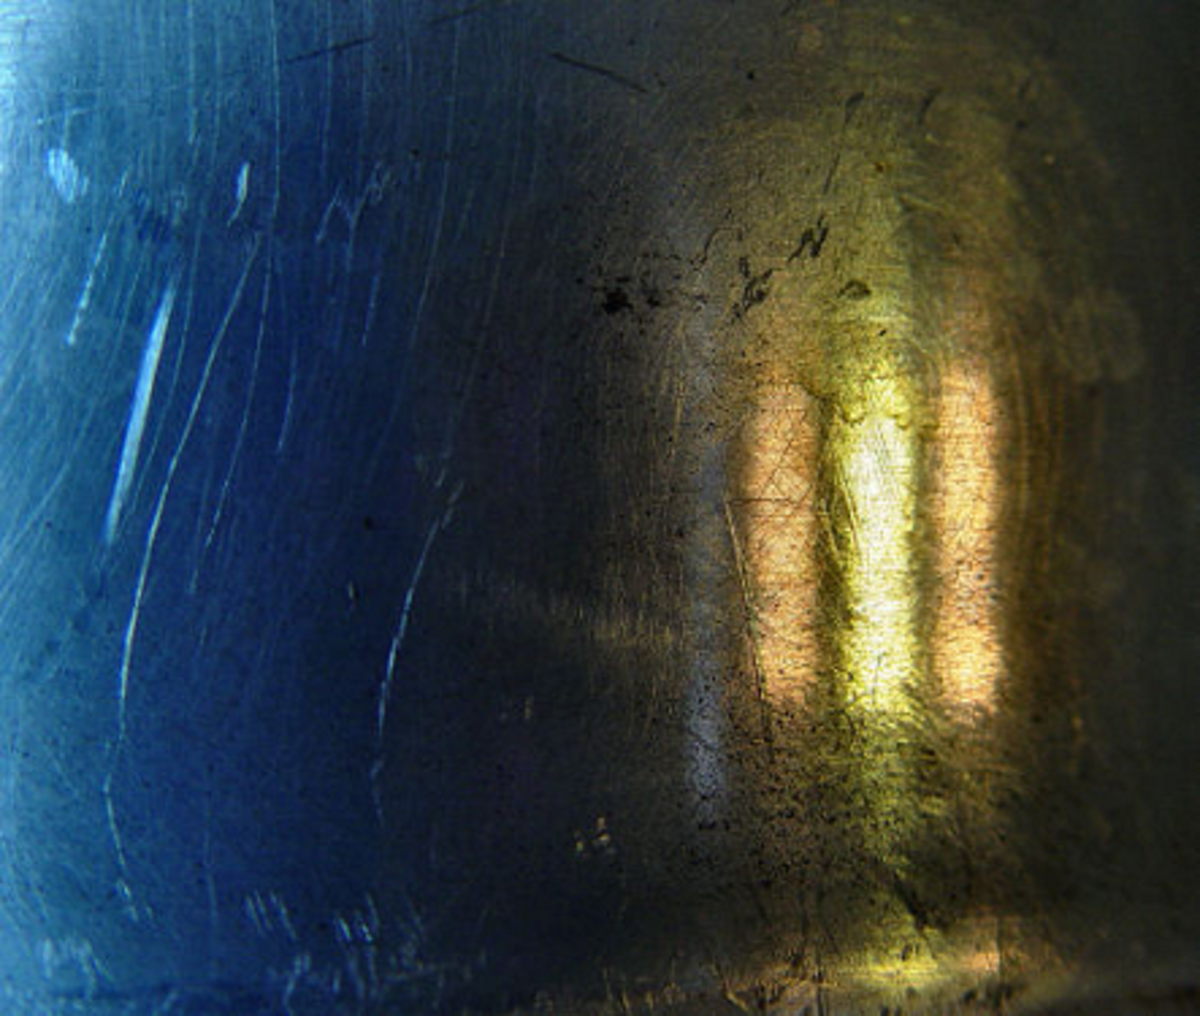 Reflection of a lamp in old metal kettle